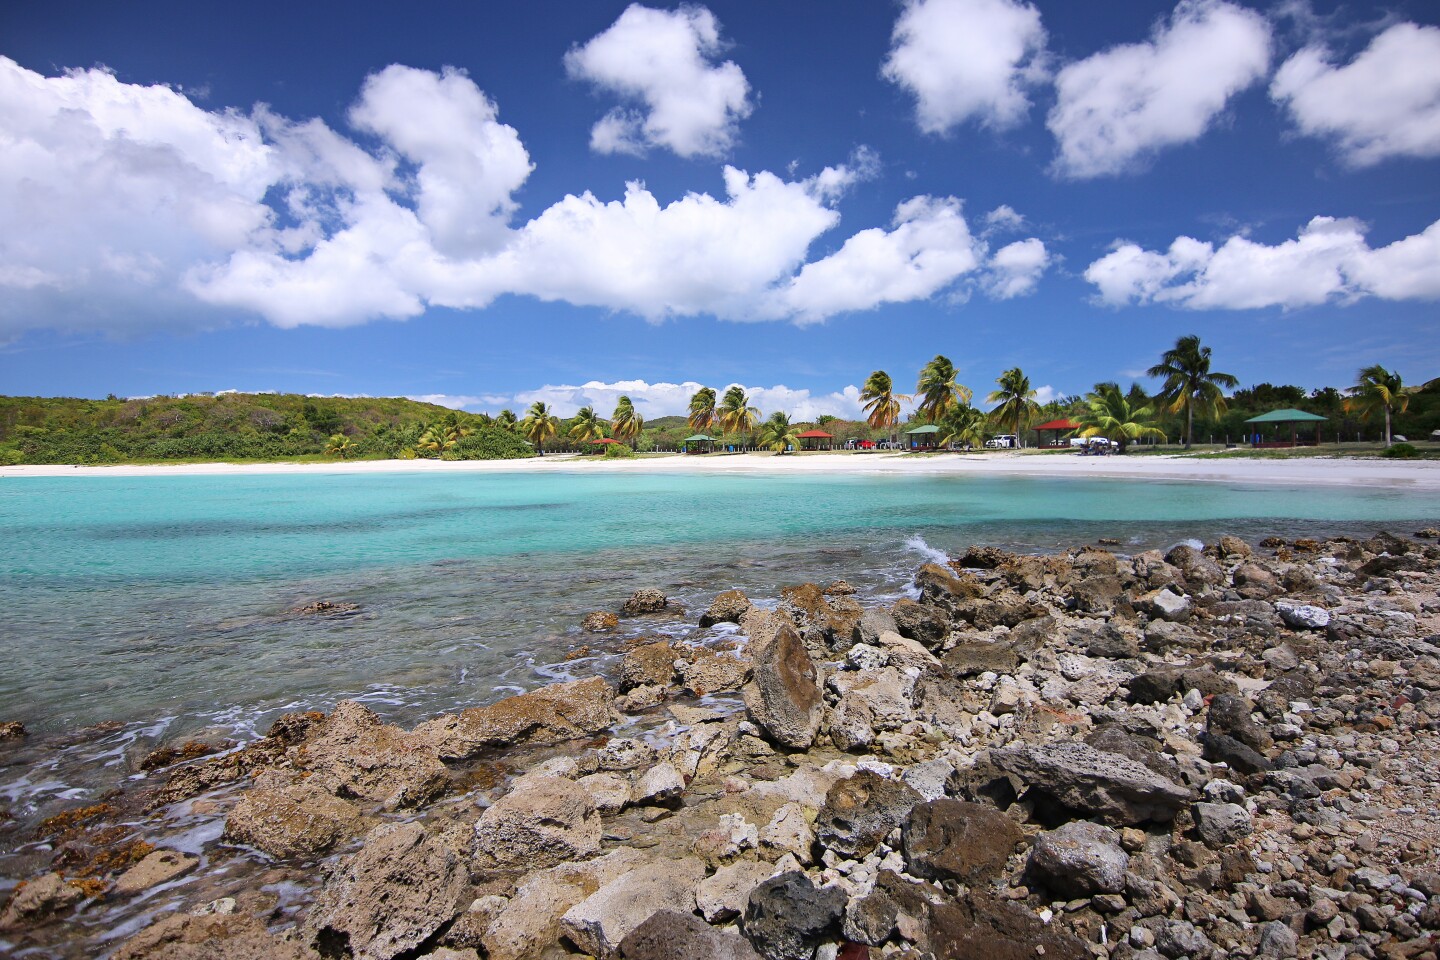 <h2>3. Playa Caracas</h2> <p><i>Vieques</i></p> <p> Vieques’s bioluminescent lagoon tends to take the island’s spotlight, and it’s stunning, for sure. But beach lovers might be even more impressed by the powdery stretches of Playa Caracas, one of the finest examples of a quintessential Caribbean beach. Located on the island’s south coast, it’s one of the most easily accessible beaches within the Vieques National Wildlife Refuge yet rarely crowded. Dramatic rock formations surrounding the chalk white crescent of sand are carpeted with vegetation, and the surrounding waters are usually as transparent as a swimming pool.</p> <p>To continue the zen theme, book a suite at the farmhouse-style boutique inn and yoga retreat, <a class="Link" href="https://www.finca-victoria.com/" rel="noopener">Finca Victoria</a>, and stay surrounded by cacti and flowering gardens.</p>